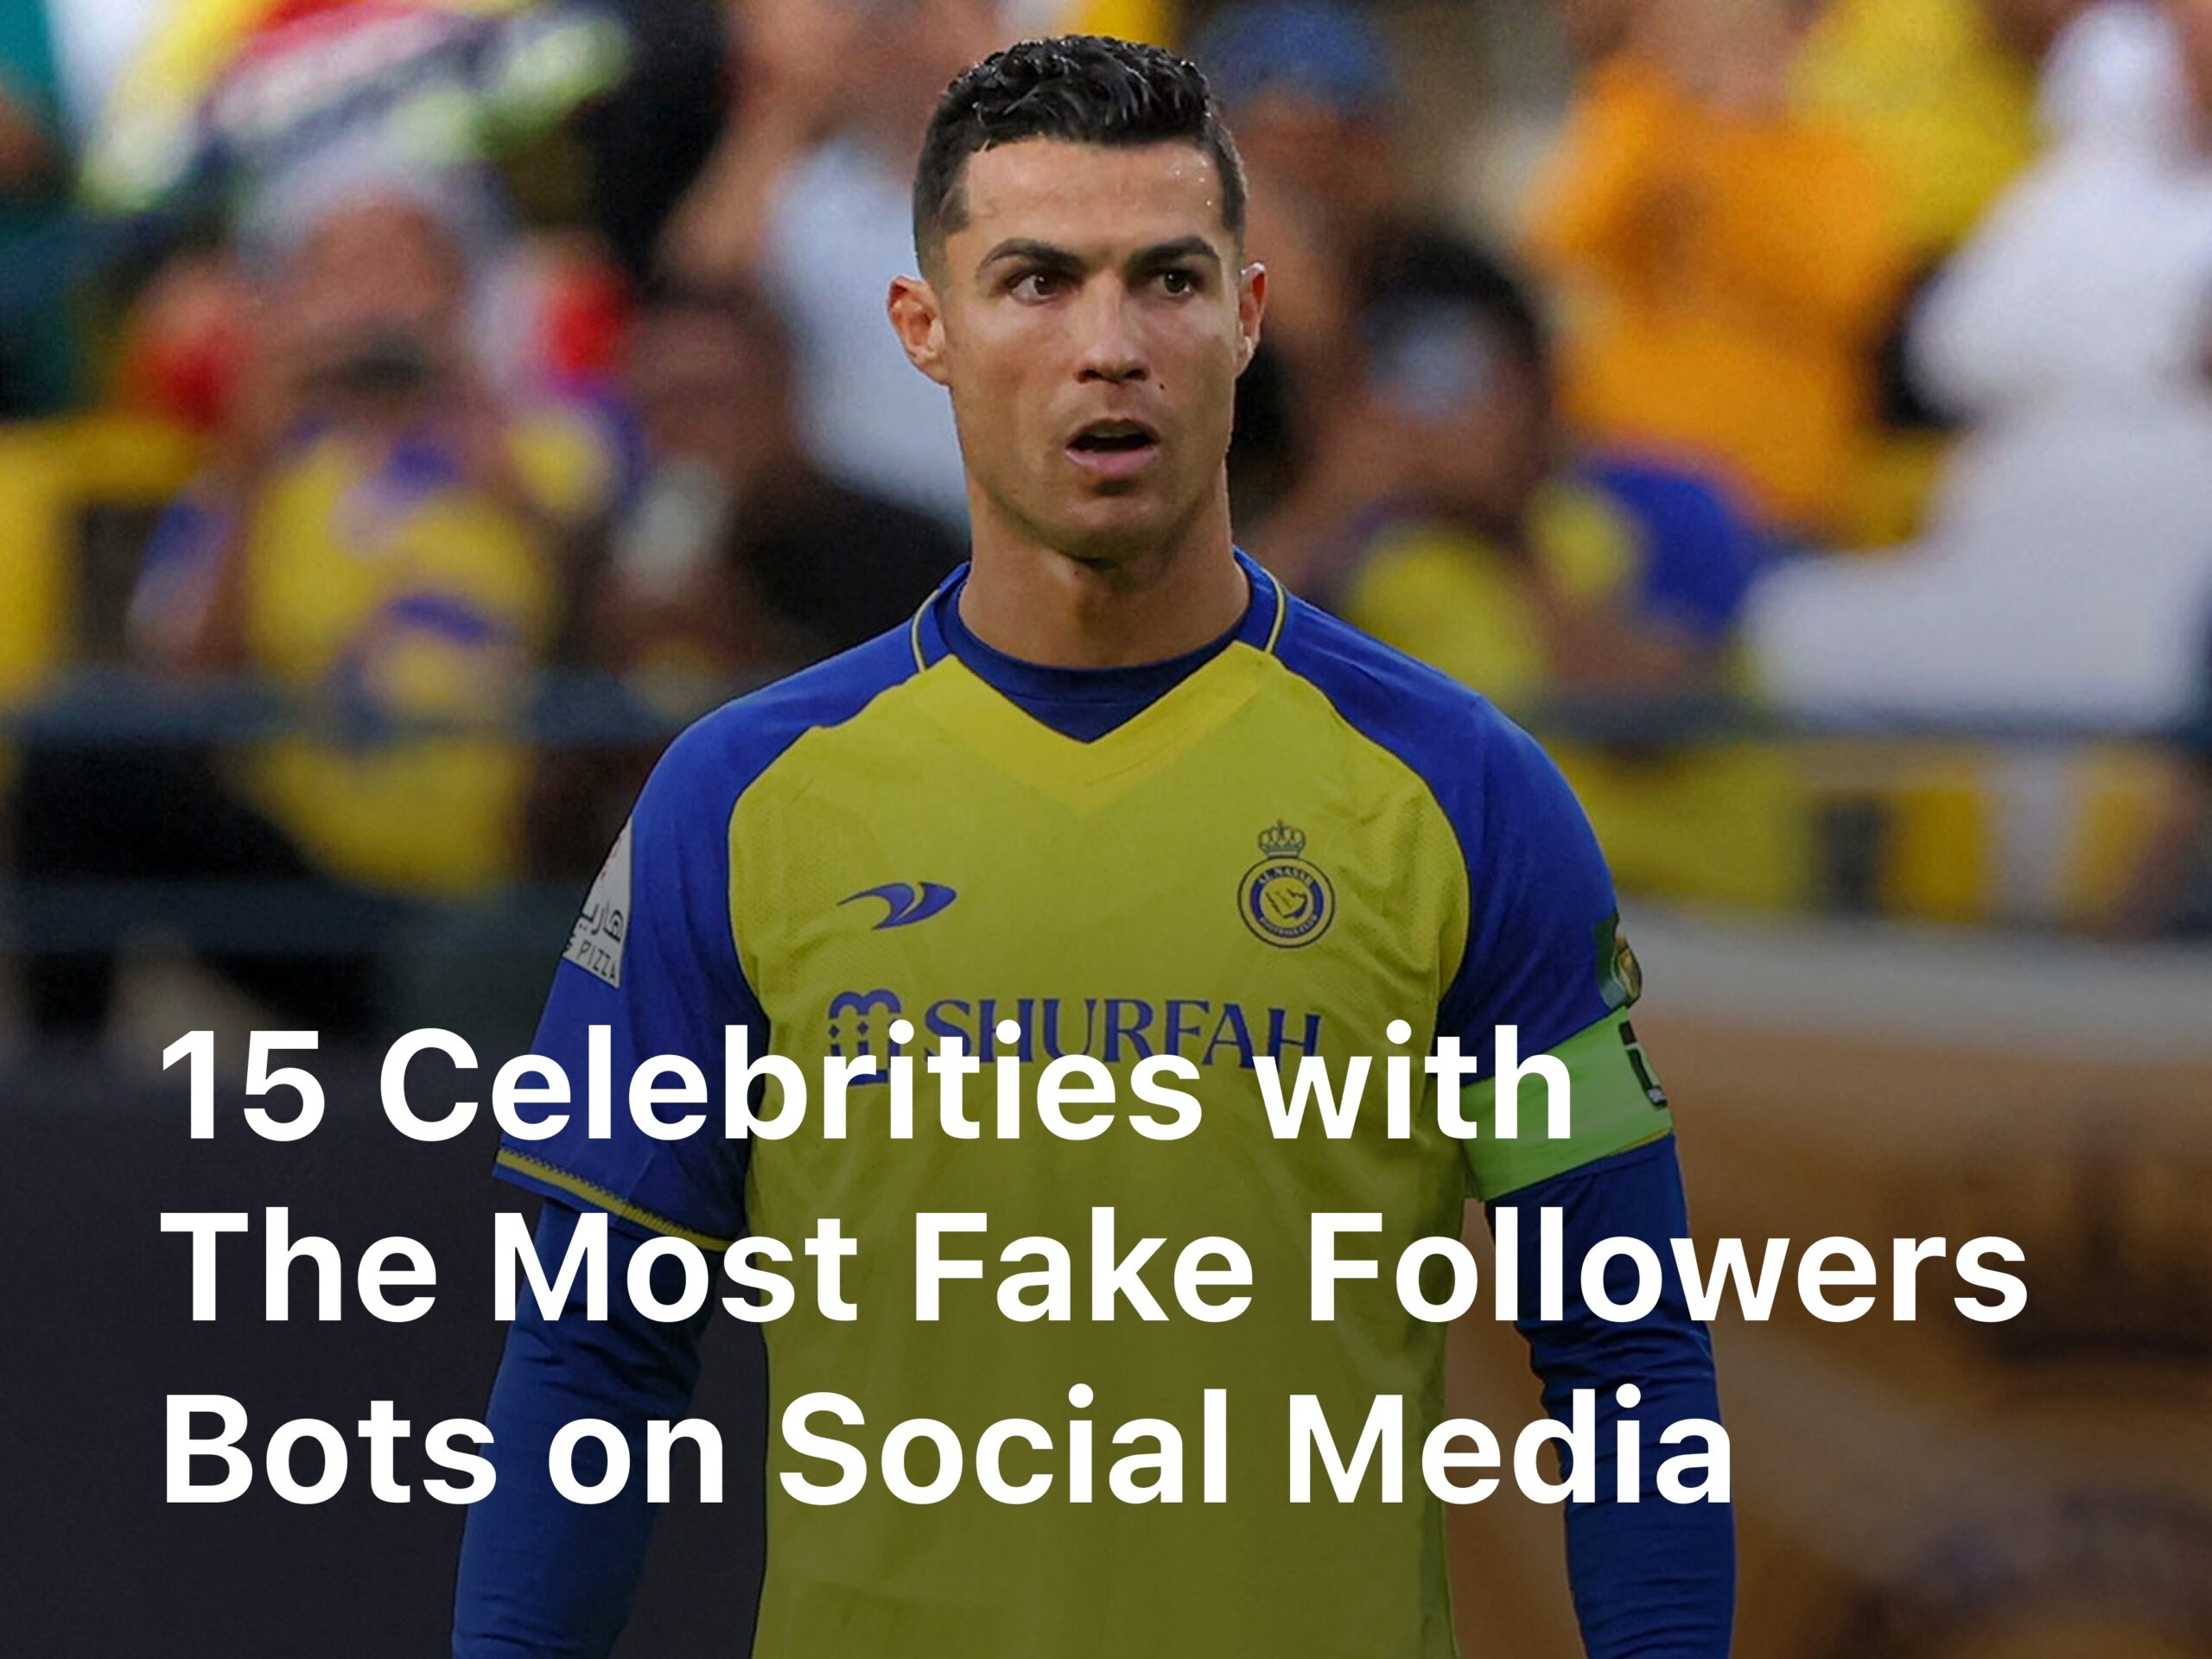 Celebrities with the most fake follower